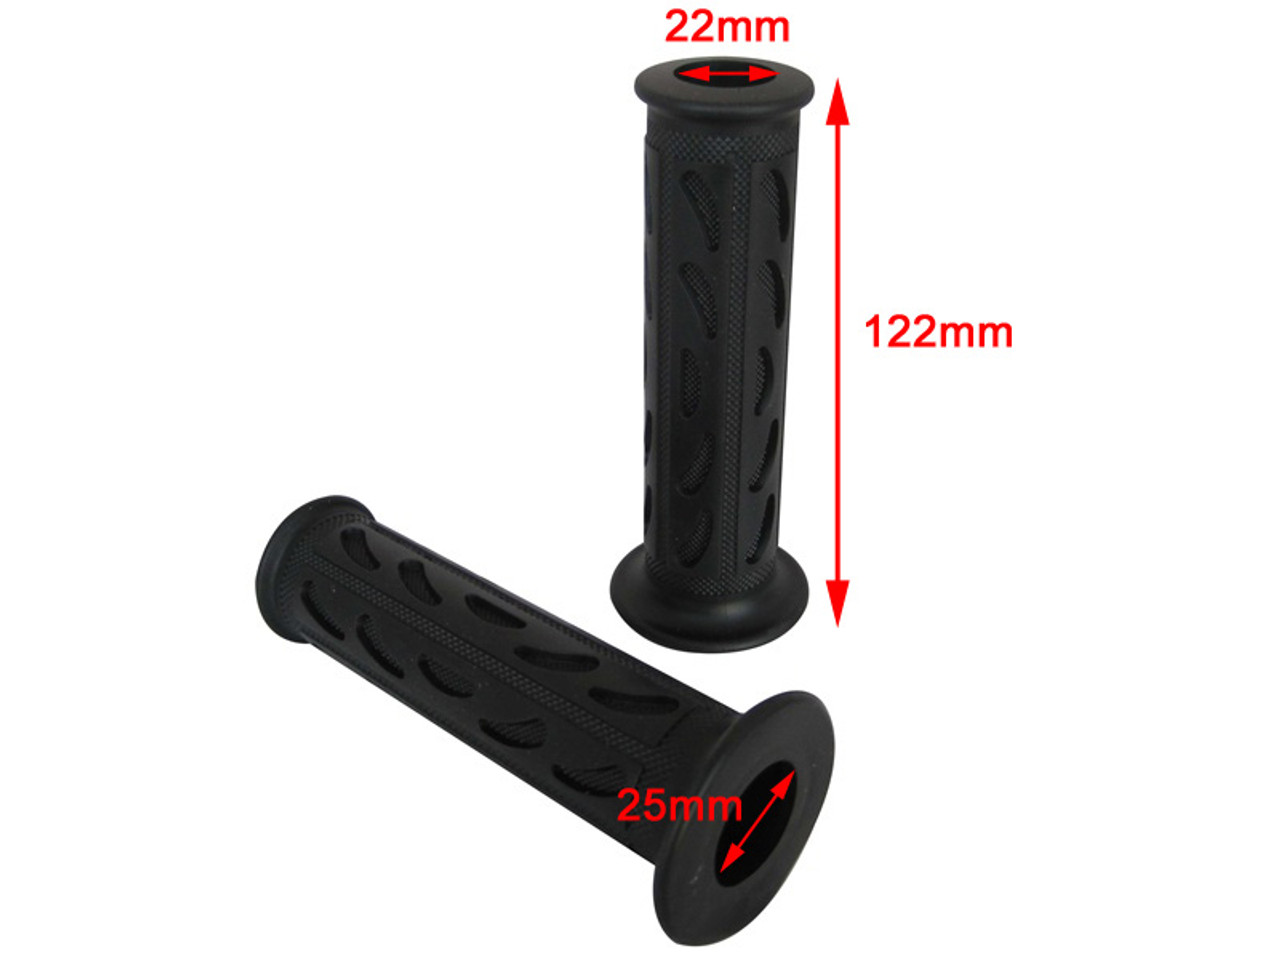 Black Soft Silicon / Rubber Motorcycle Motorbike Hand Grips 22mm 7